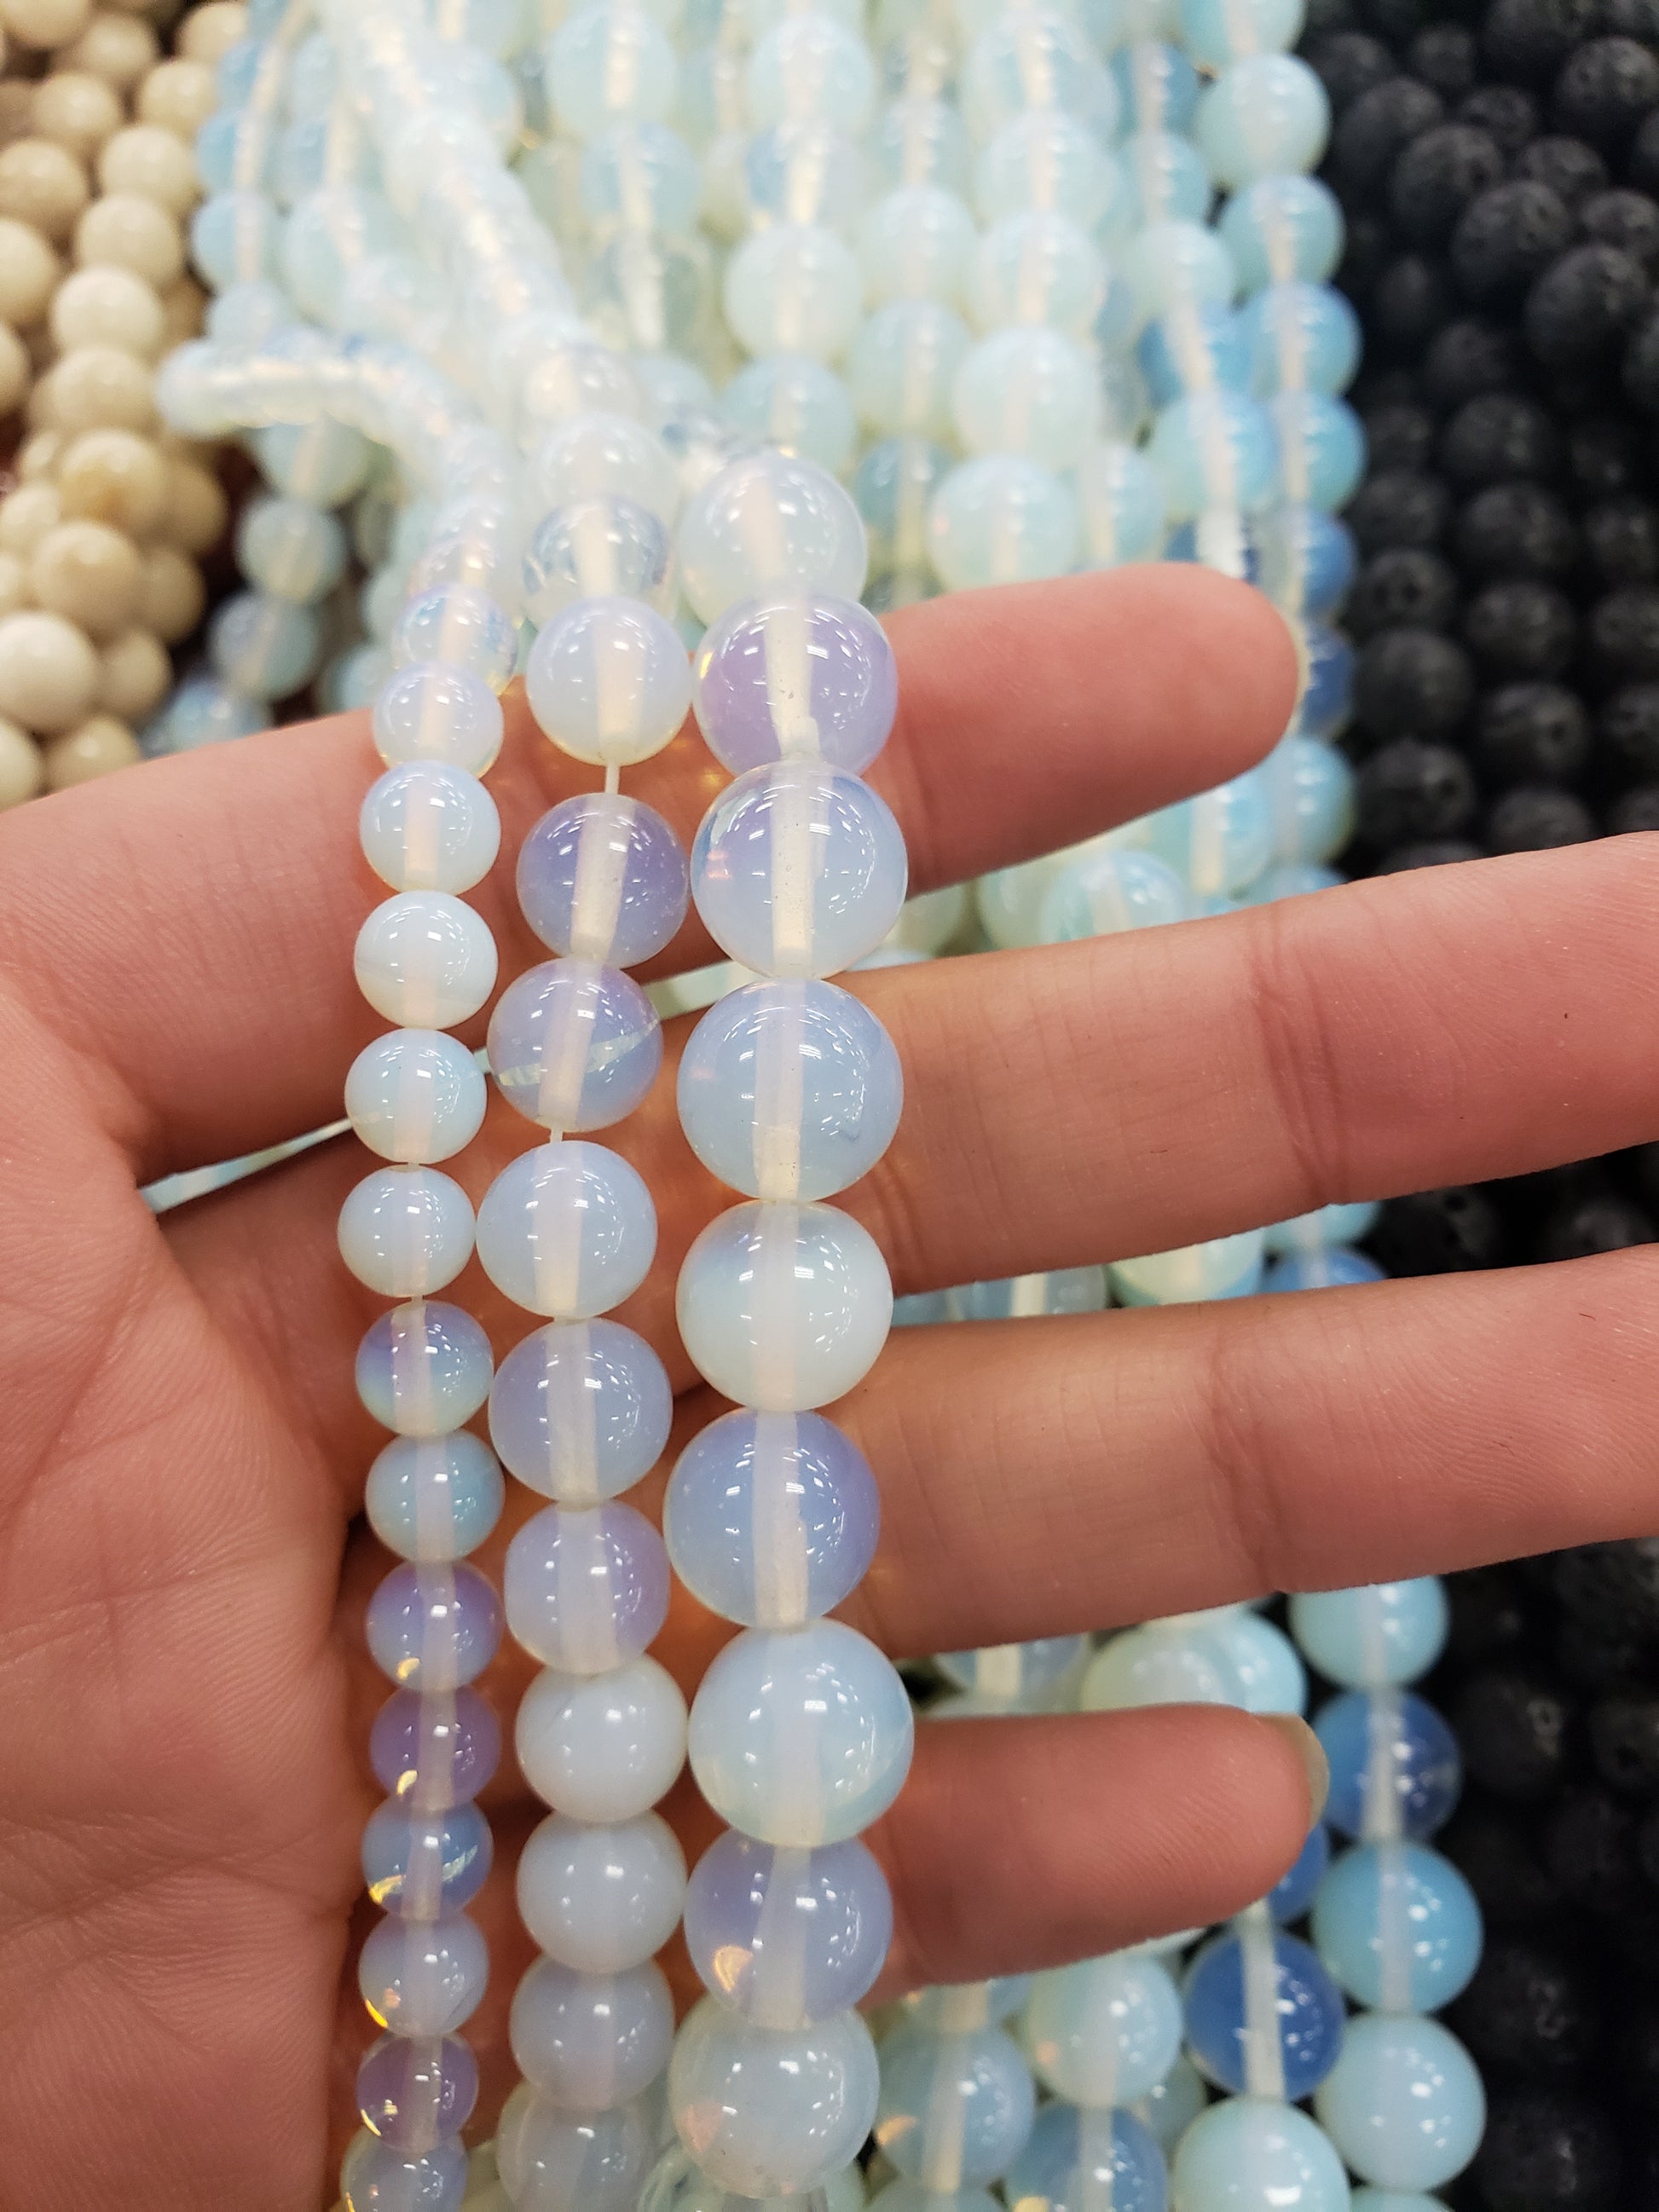 Crafting supplies such as opalite beads available at wholesale and retail prices, only at our crystal shop in San Diego!